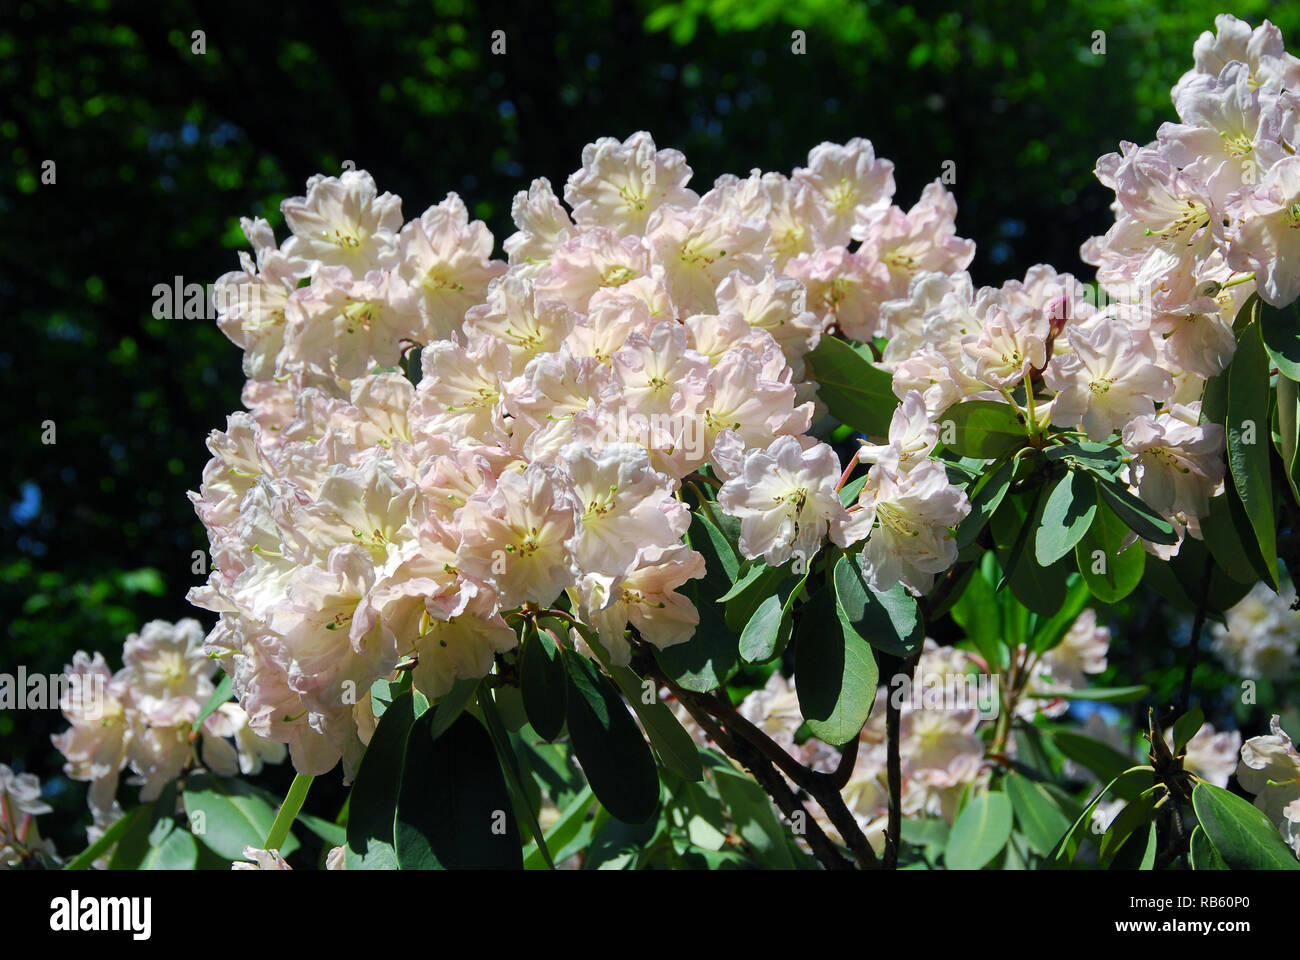 Flowering Rhododendron in the Jeli Arboretum, Hungary. Rhododendron, Rhododendren, havasszépe vagy rododendron Stock Photo